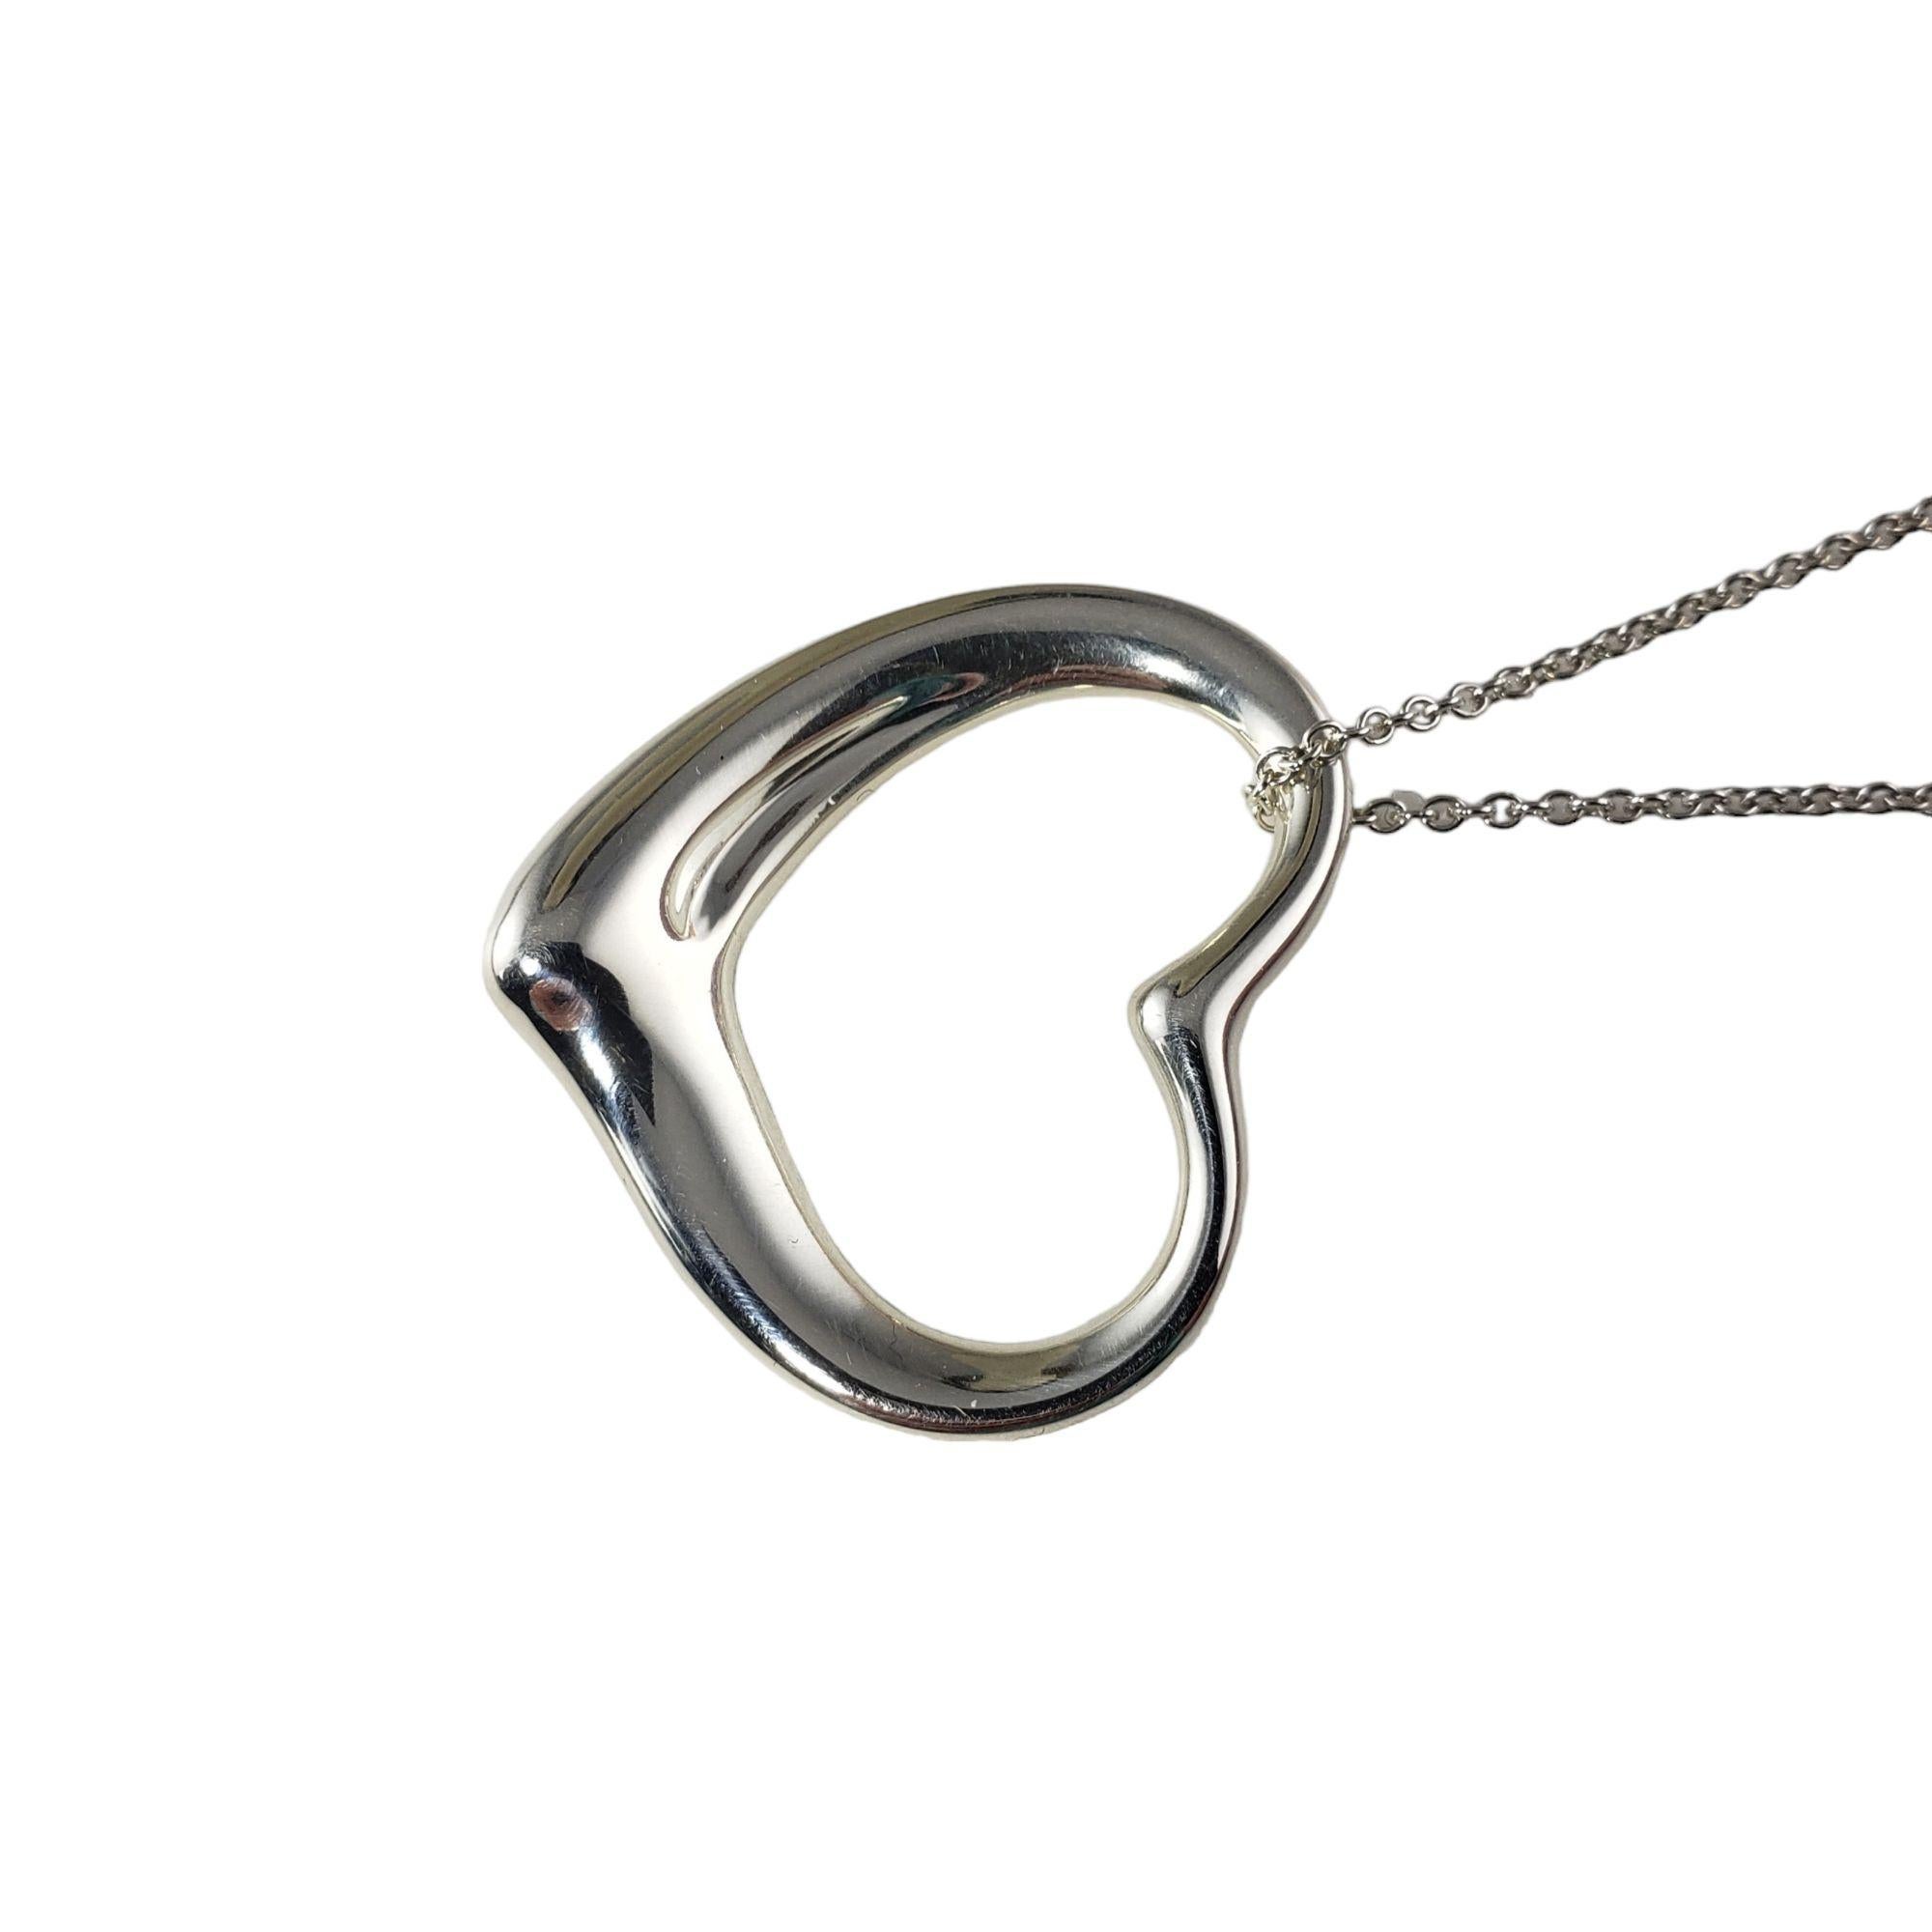 Vintage Tiffany & Co. Elsa Peretti Sterling Silver Open Heart Pendant Necklace-

This elegant open heart pendant by Elsa Peretti for Tiffany & Co. suspends from a classic cable necklace.

Size: 30 inches (necklace)
35 mm (pendant)

Weight: 16 gr./